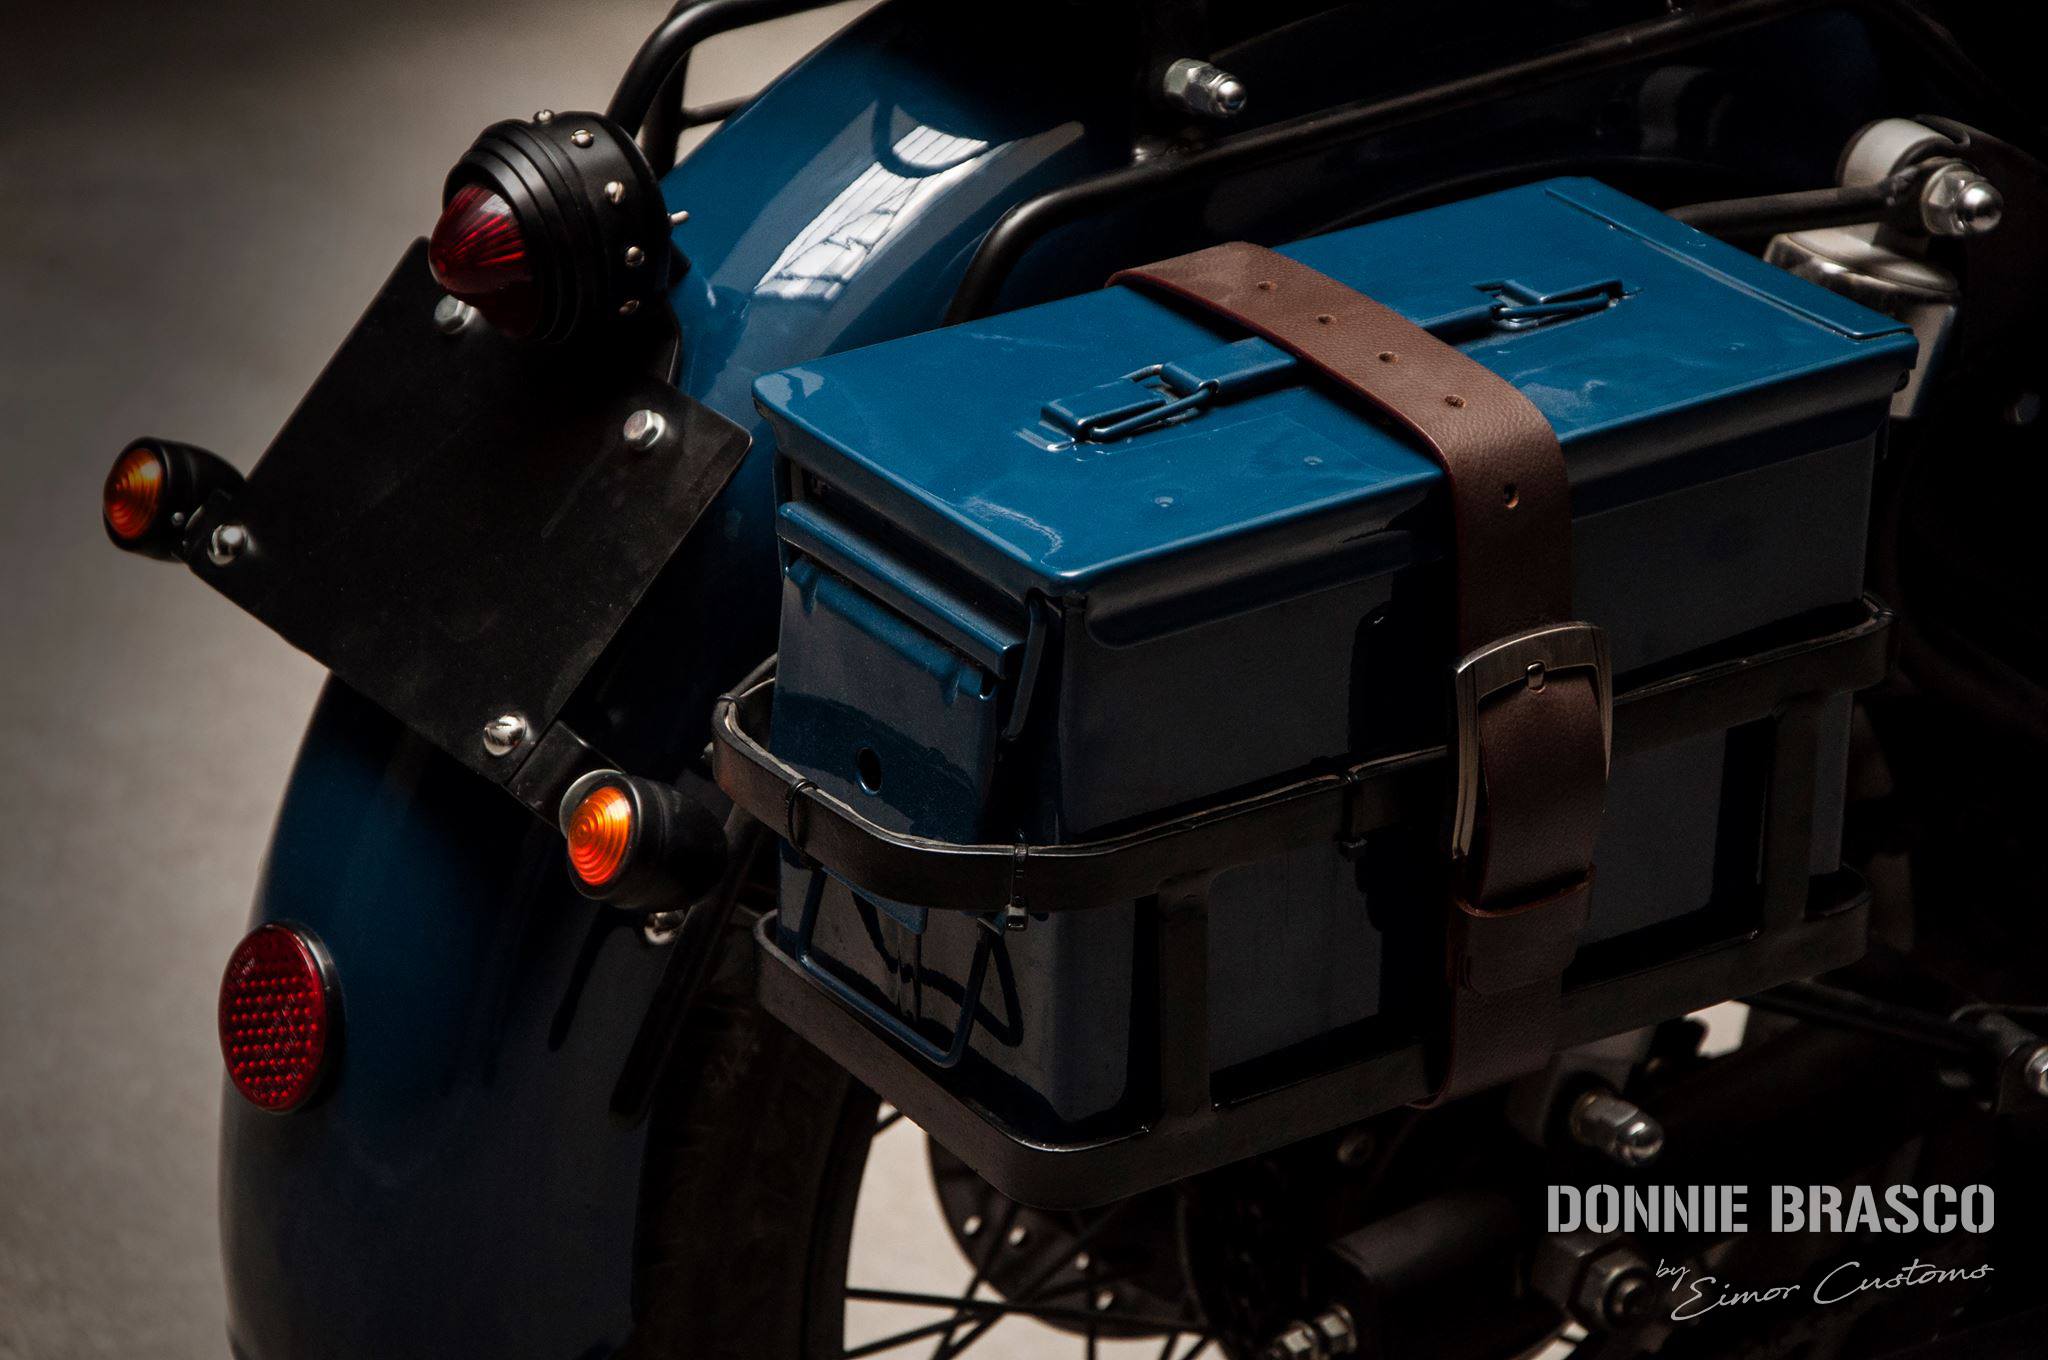 EIMOR Royal Enfield Classic 'Donnie Brasco' Details and Photos - back